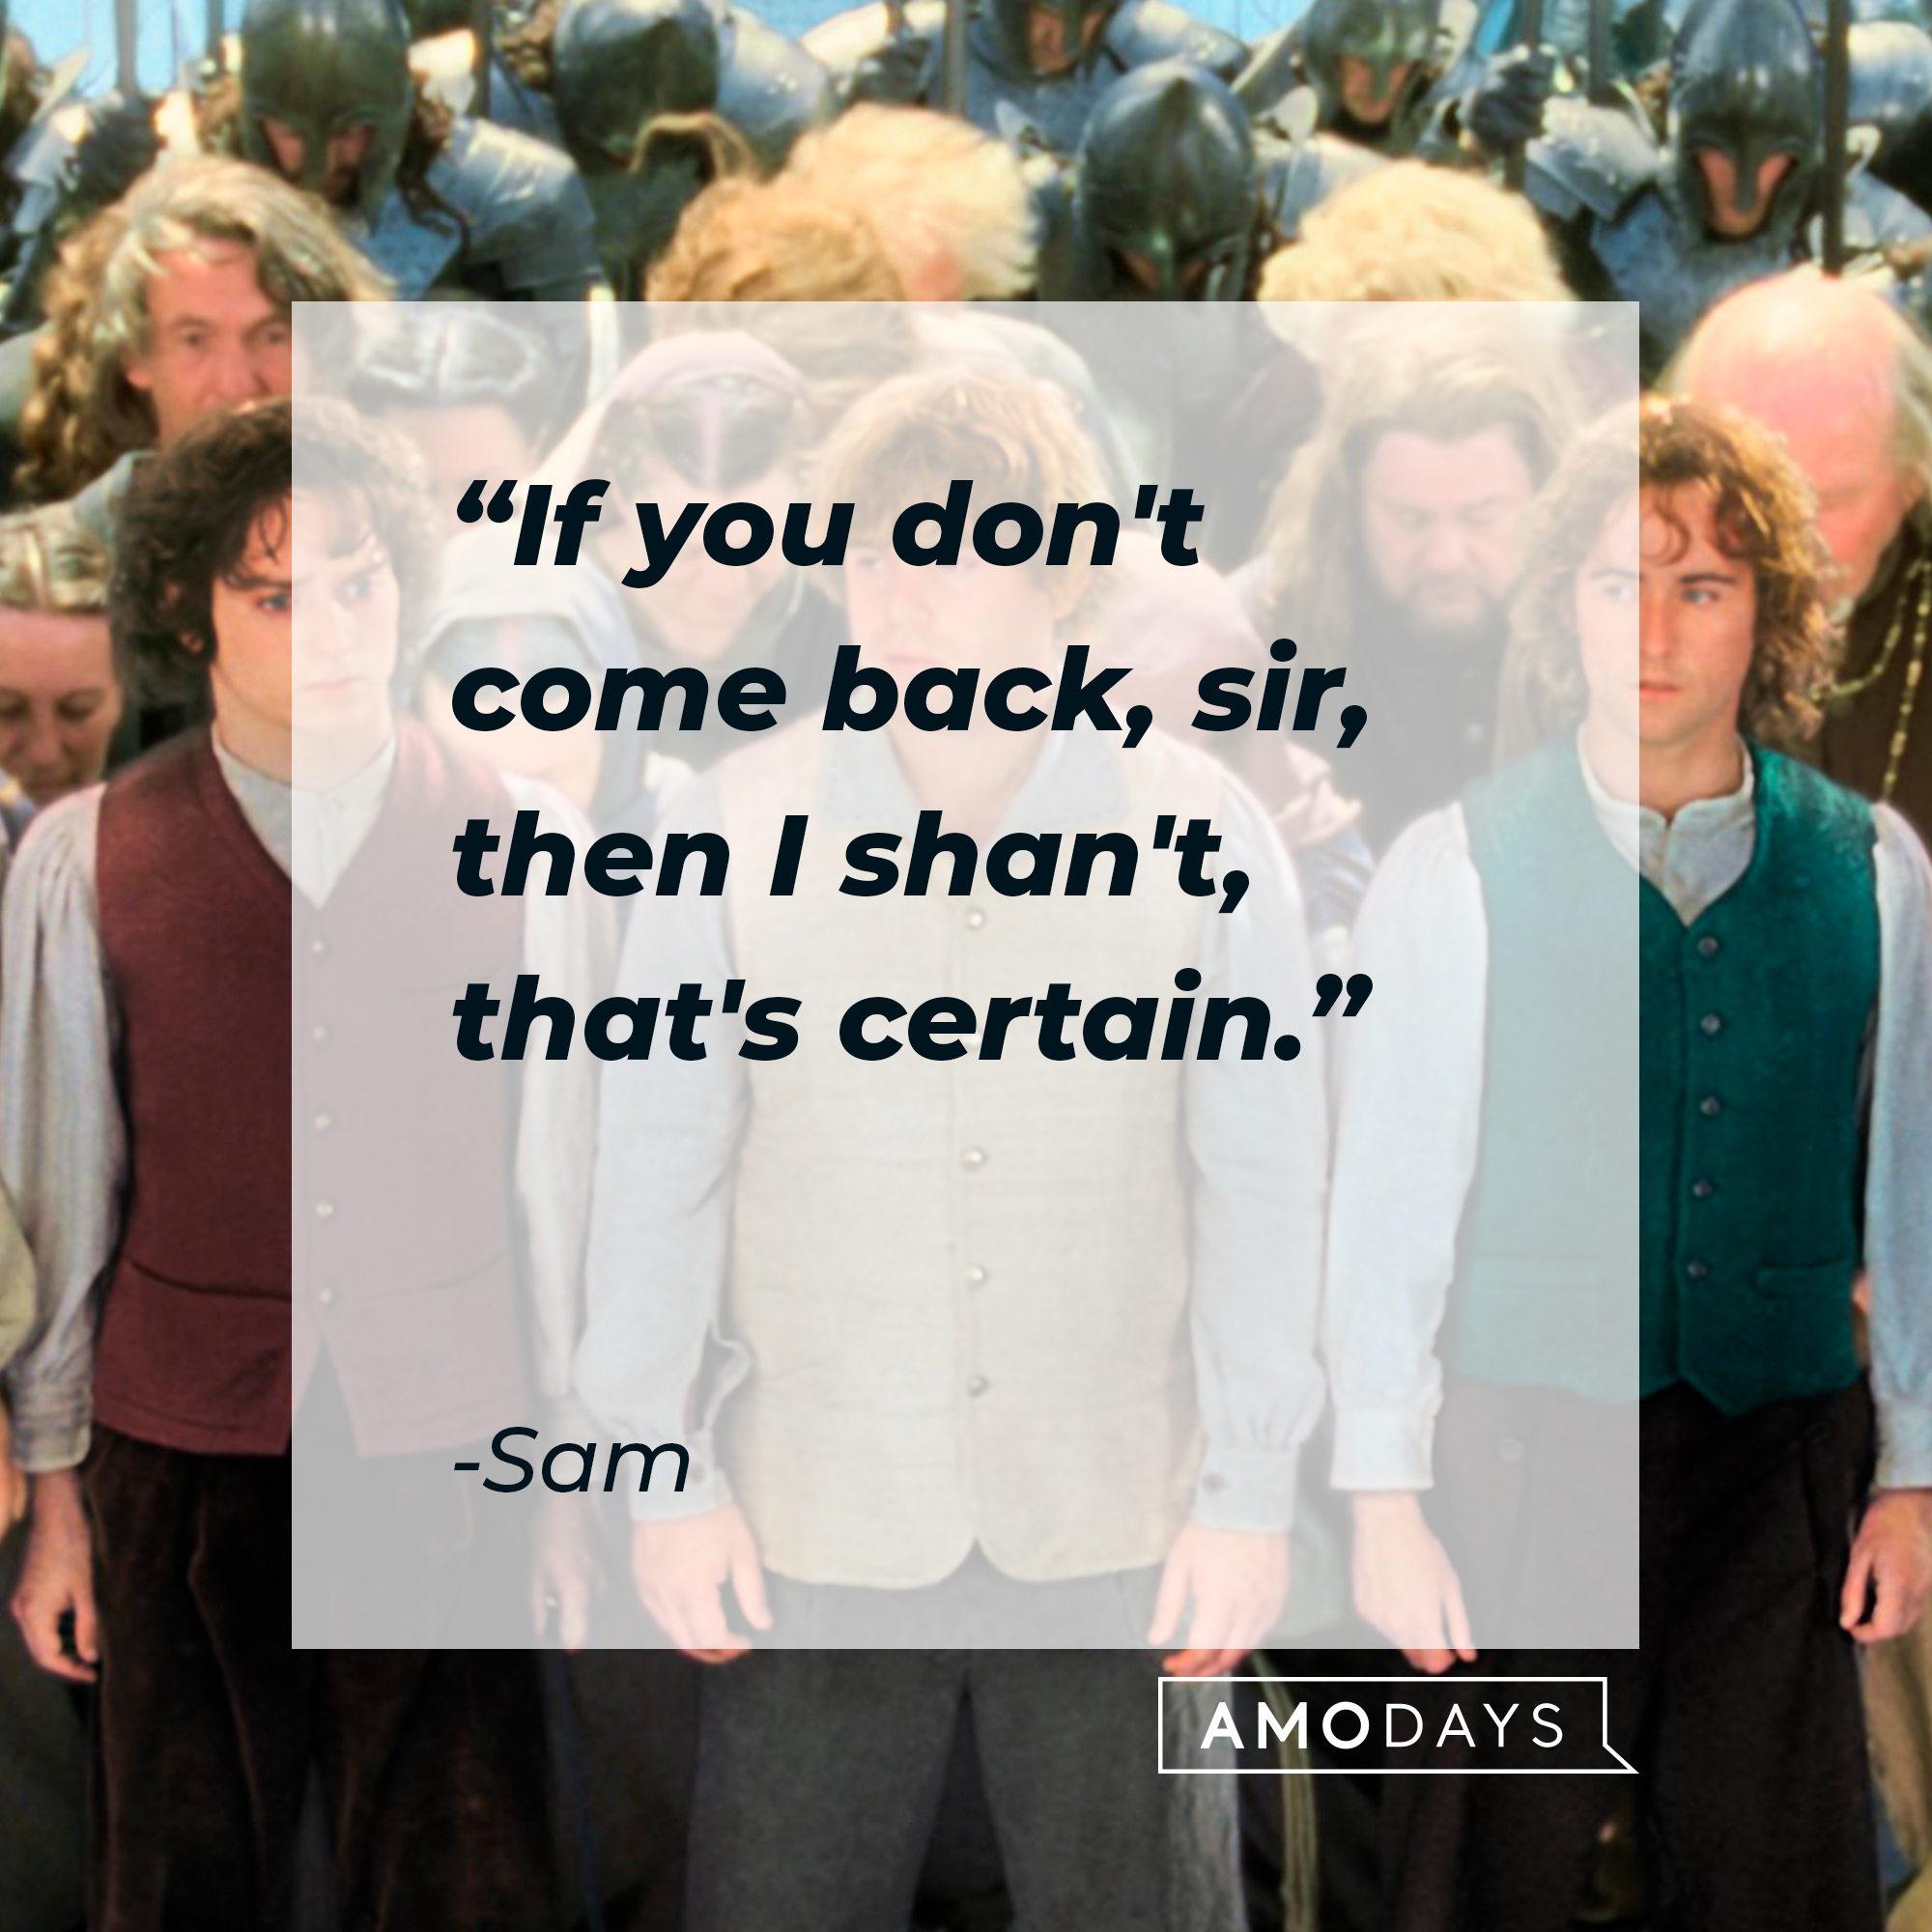 Sam's quote: "If you don't come back, sir, then I shan't, that's certain.” | Source: facebook.com/lordoftheringstrilogy